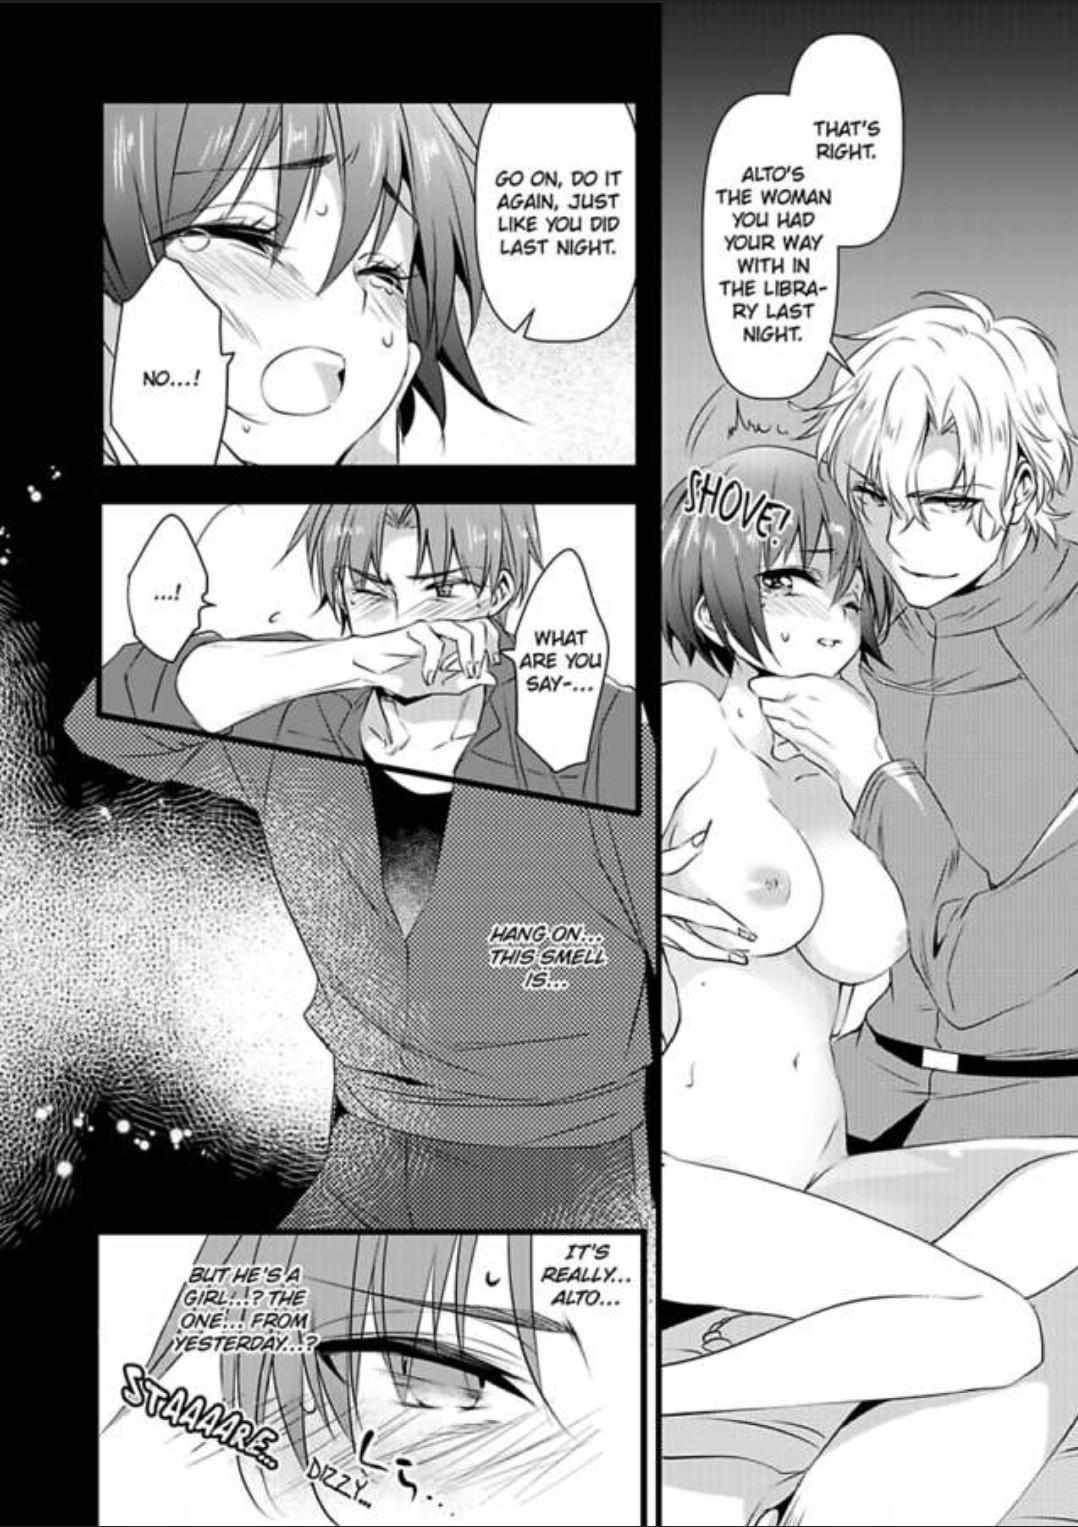 I Turned into a Girl and Turned on All the Knights! -I Need to Have Sex to Turn Back!- - chapter 6 - #2